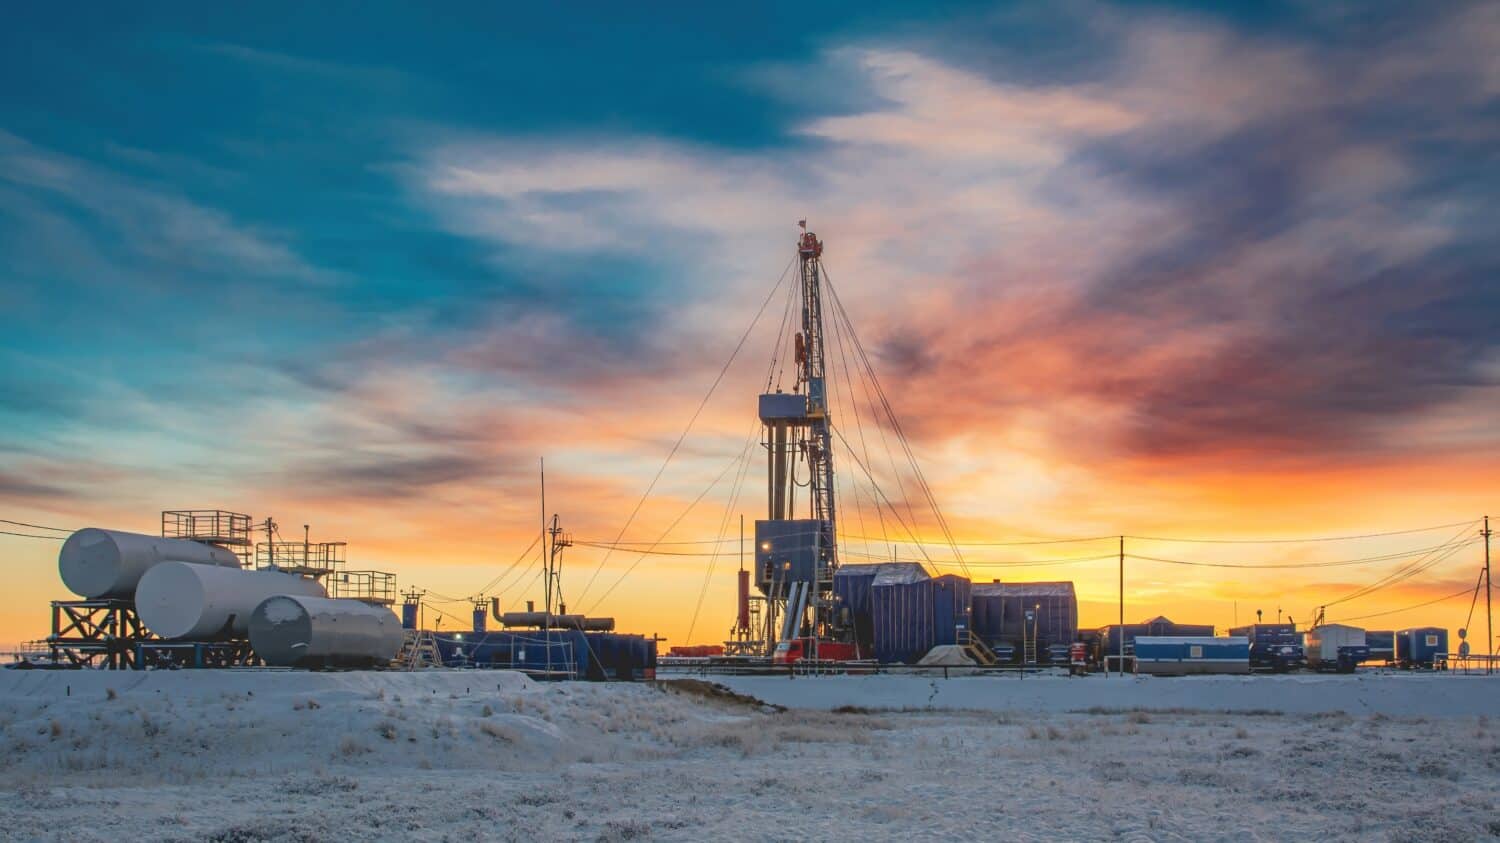 Equipment and infrastructure of the drilling rig for drilling oil and gas wells in the field of the Northern region. In the background, the colorful sky at the beginning of the polar day